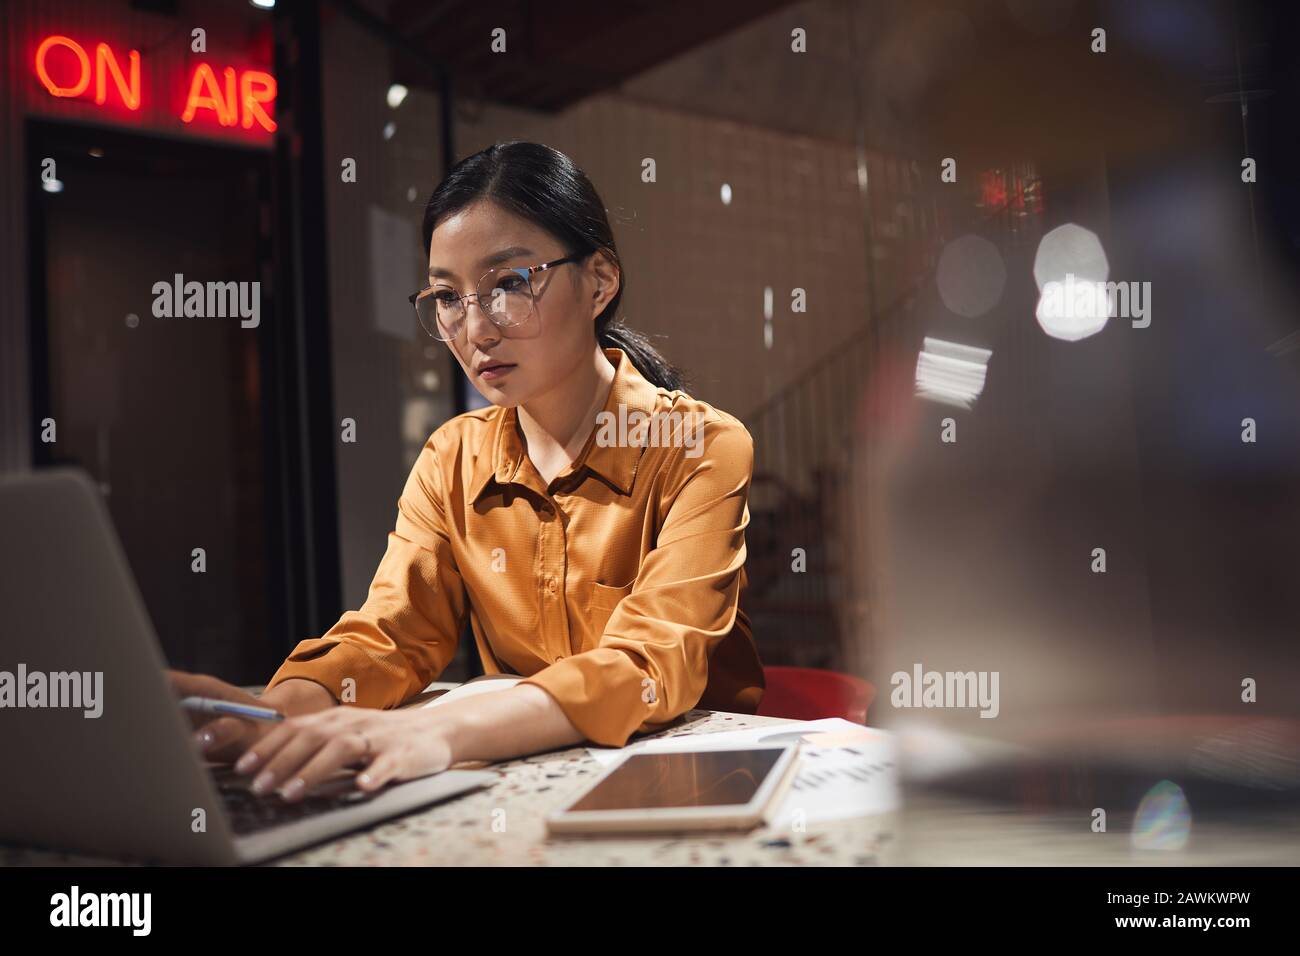 Portrait of Asian businesswoman using laptop while working late in dark office, copy space Stock Photo